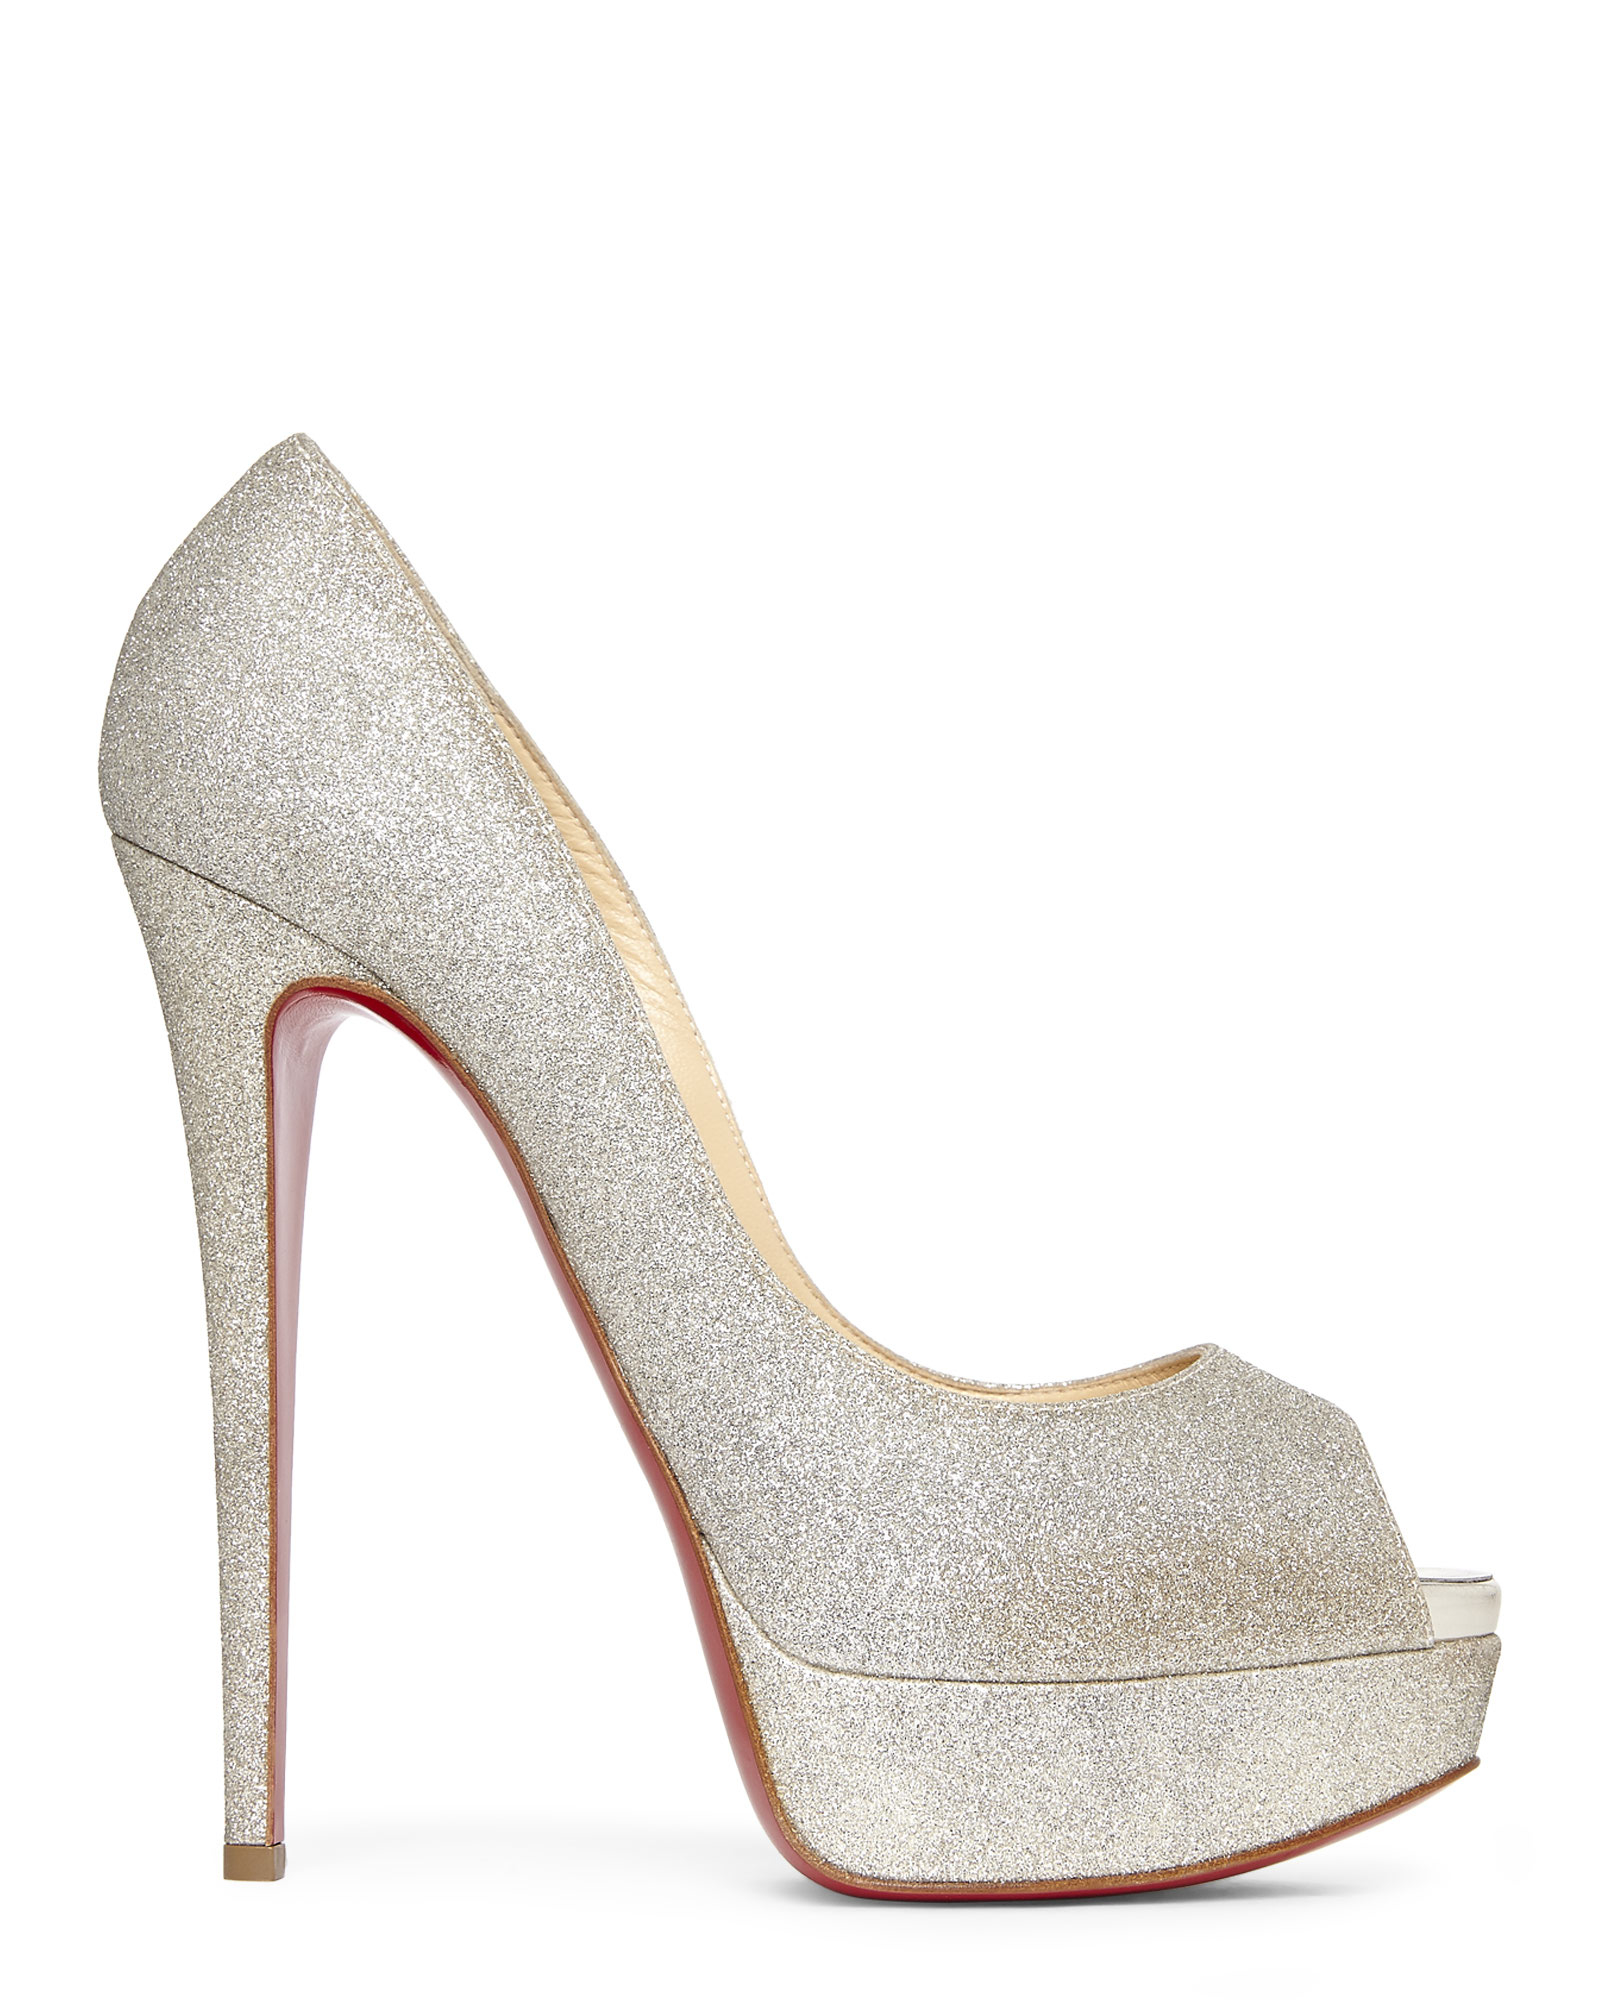 white louis vuitton loafers - Christian louboutin Lady Peep Glitter Platform Pumps in White | Lyst